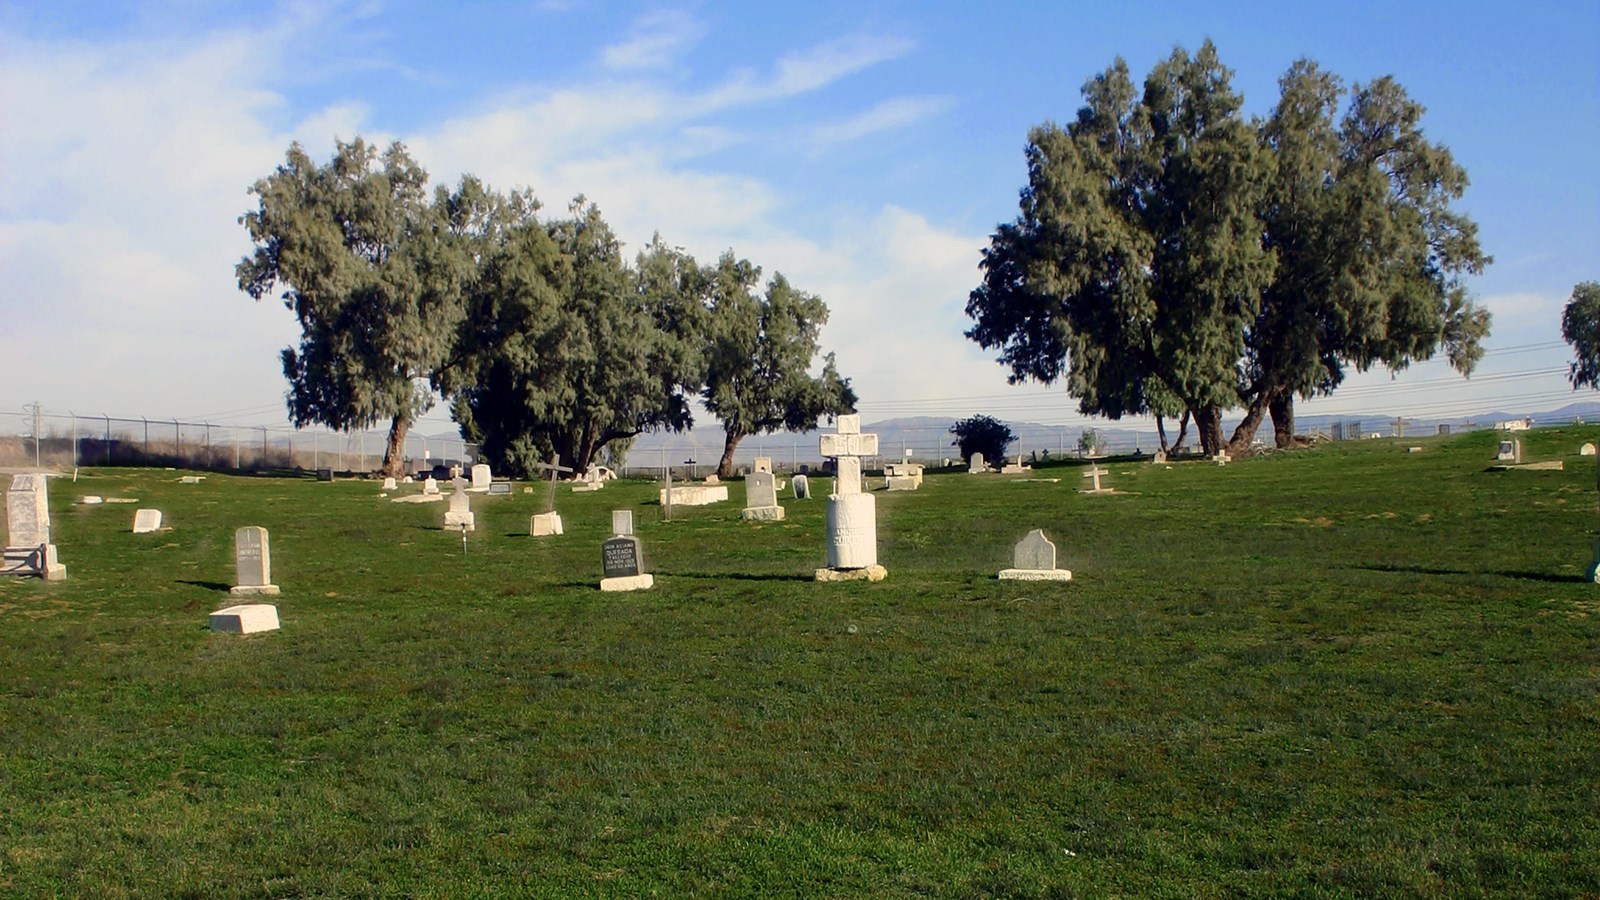 A green lawn is dotted with stone headstones under a blue sky with a few trees.